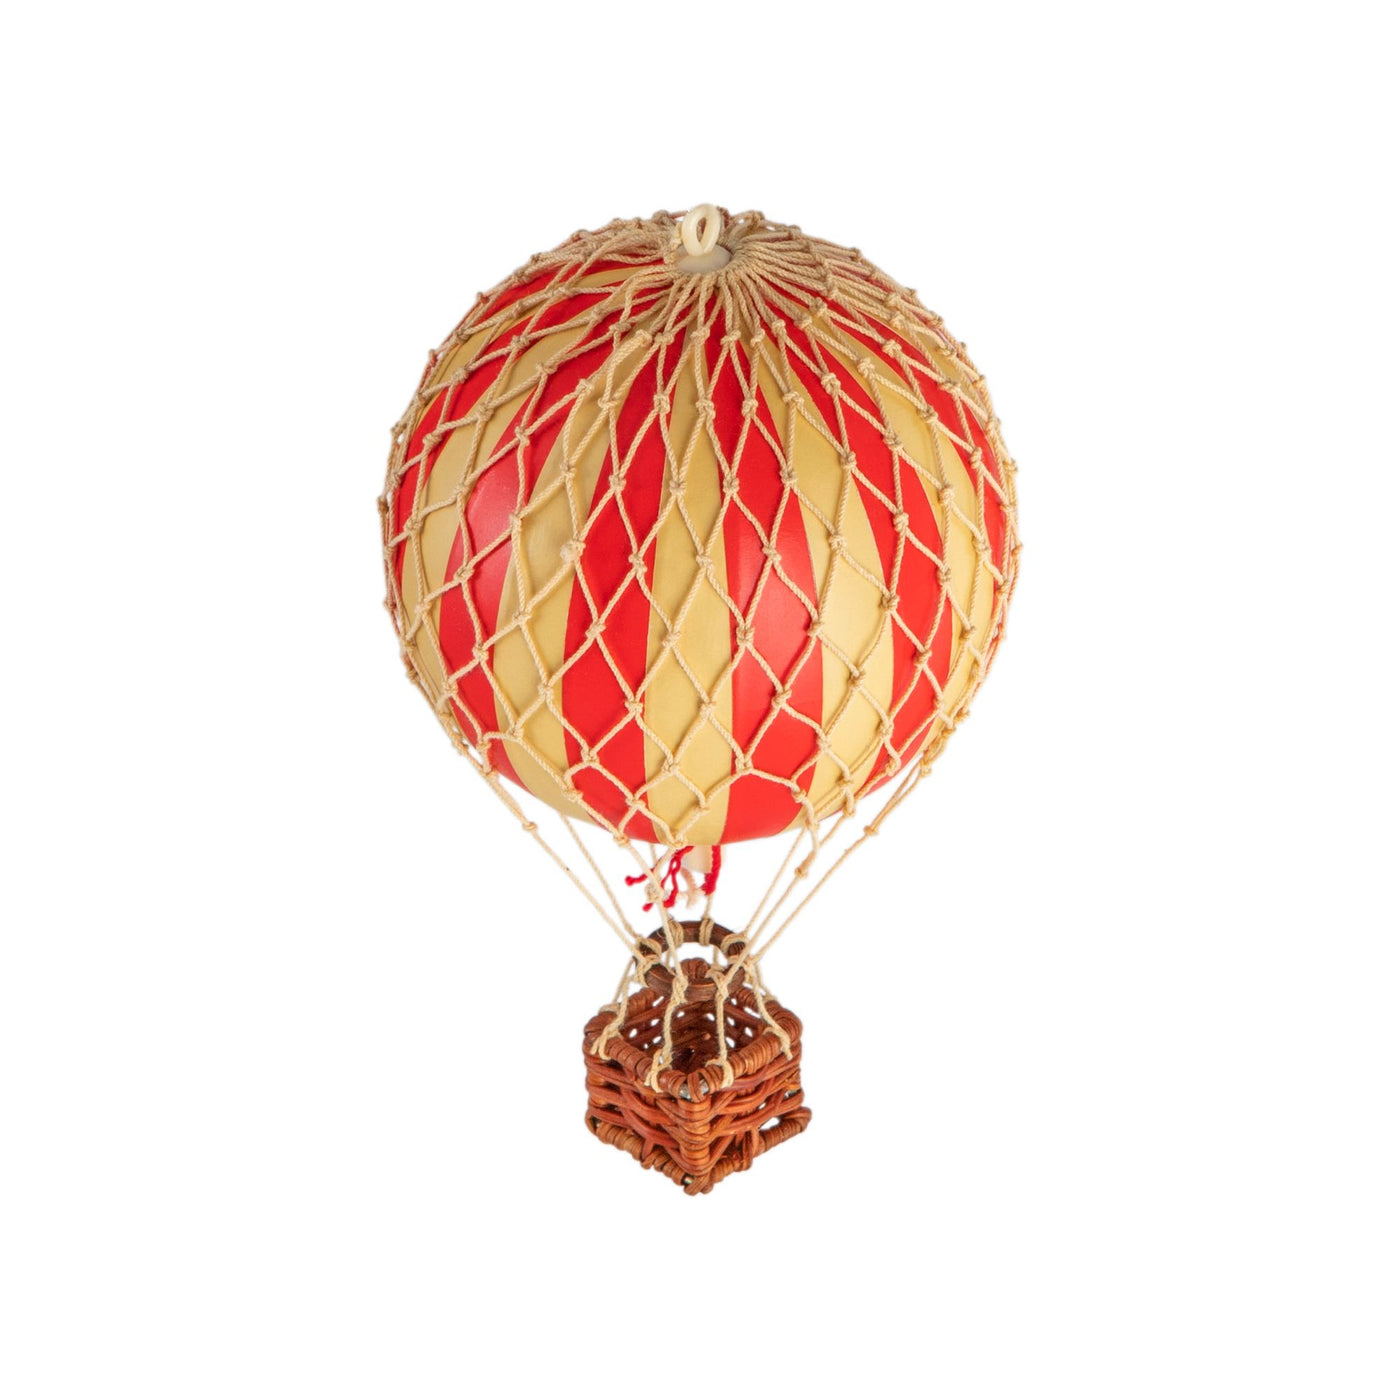 Luftballon True Red, 8,5 cm. Floating The Skies, Authentic Models